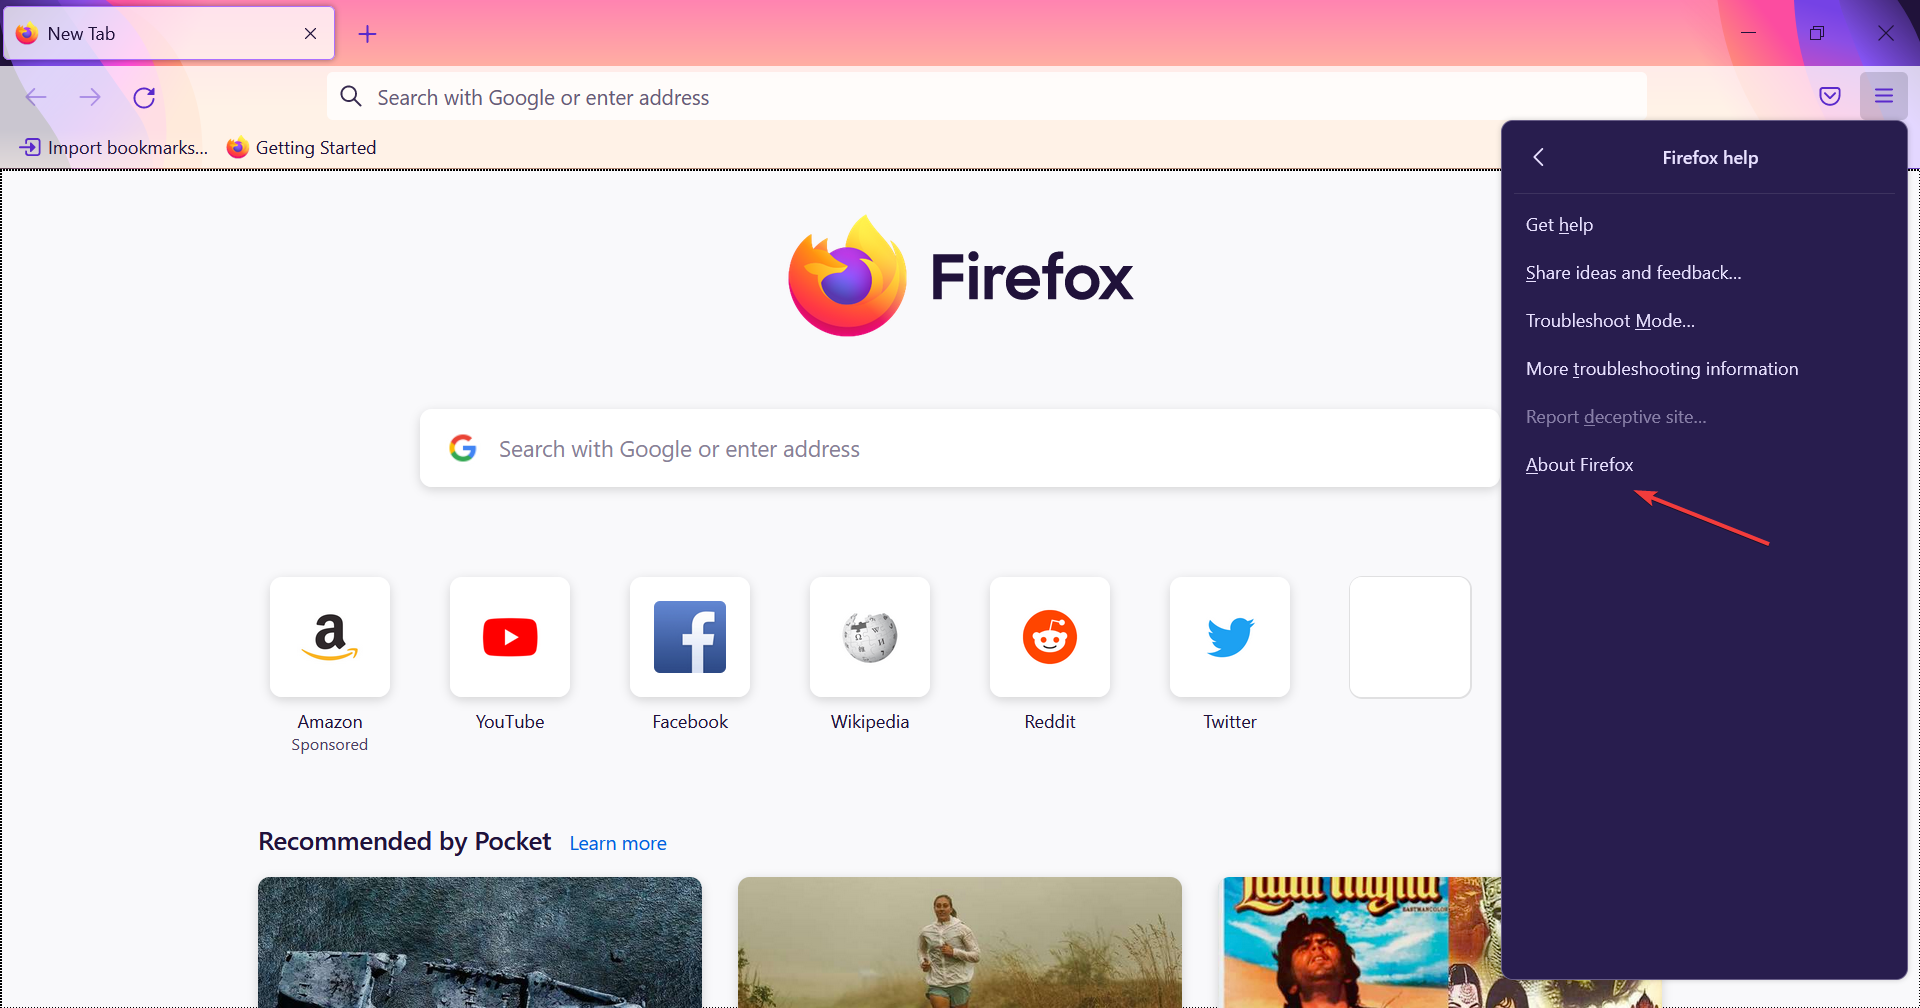 About firefox